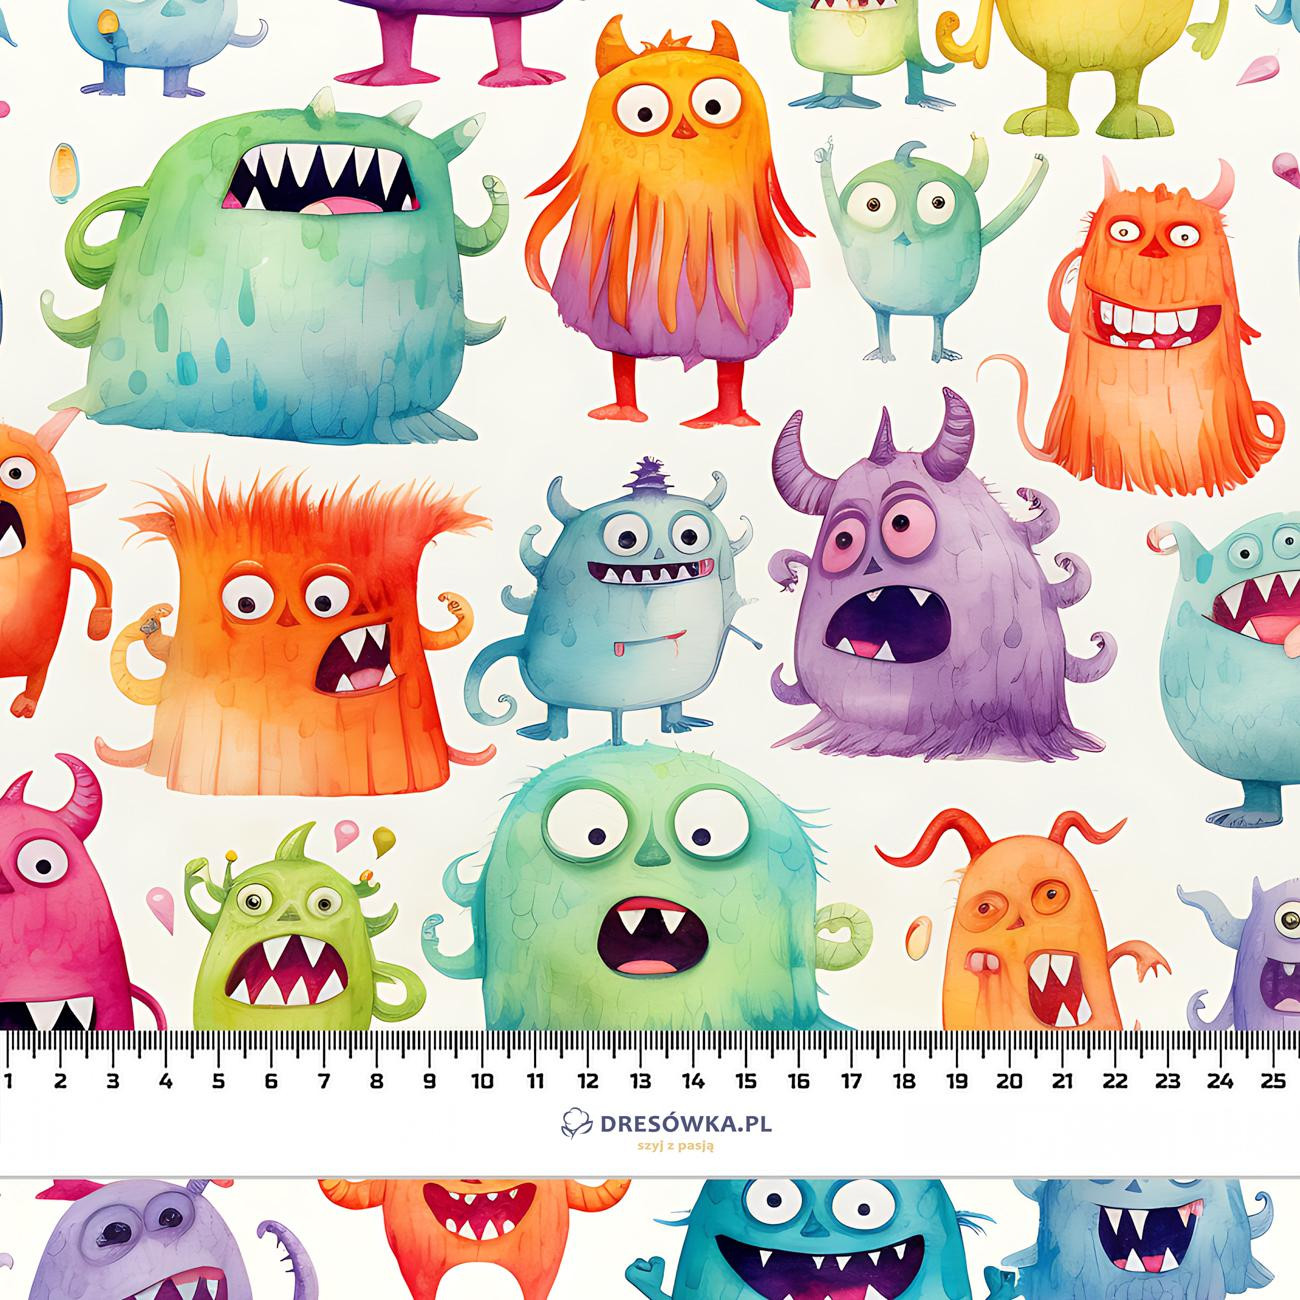 FUNNY MONSTERS PAT. 1 - Waterproof woven fabric